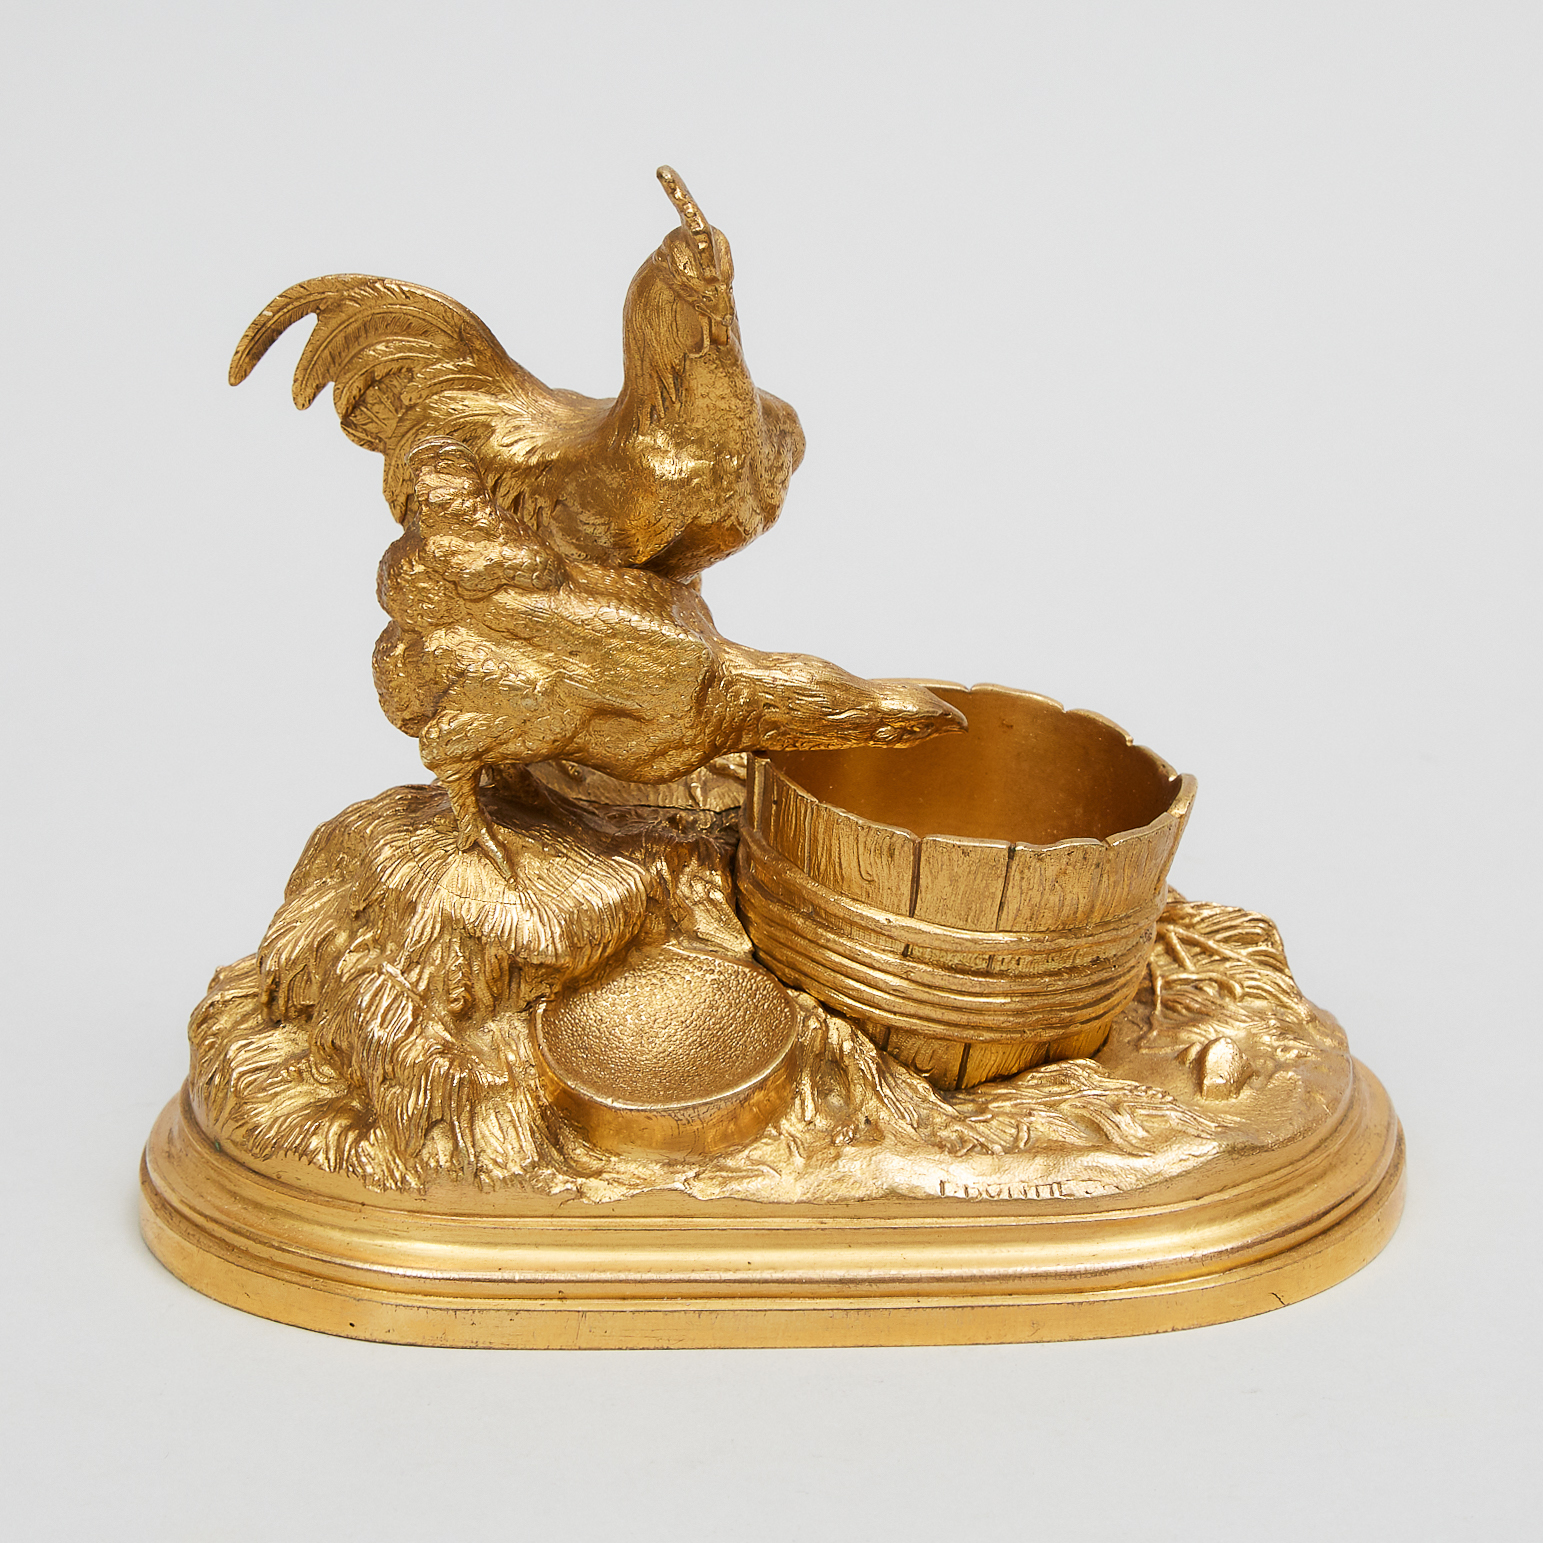 Isidore Jules Bonheur (French, 1827-1901) Gilt Bronze Animalier Group Modelled as Cockerel and Hen Feeding at a Barrel, 19th century